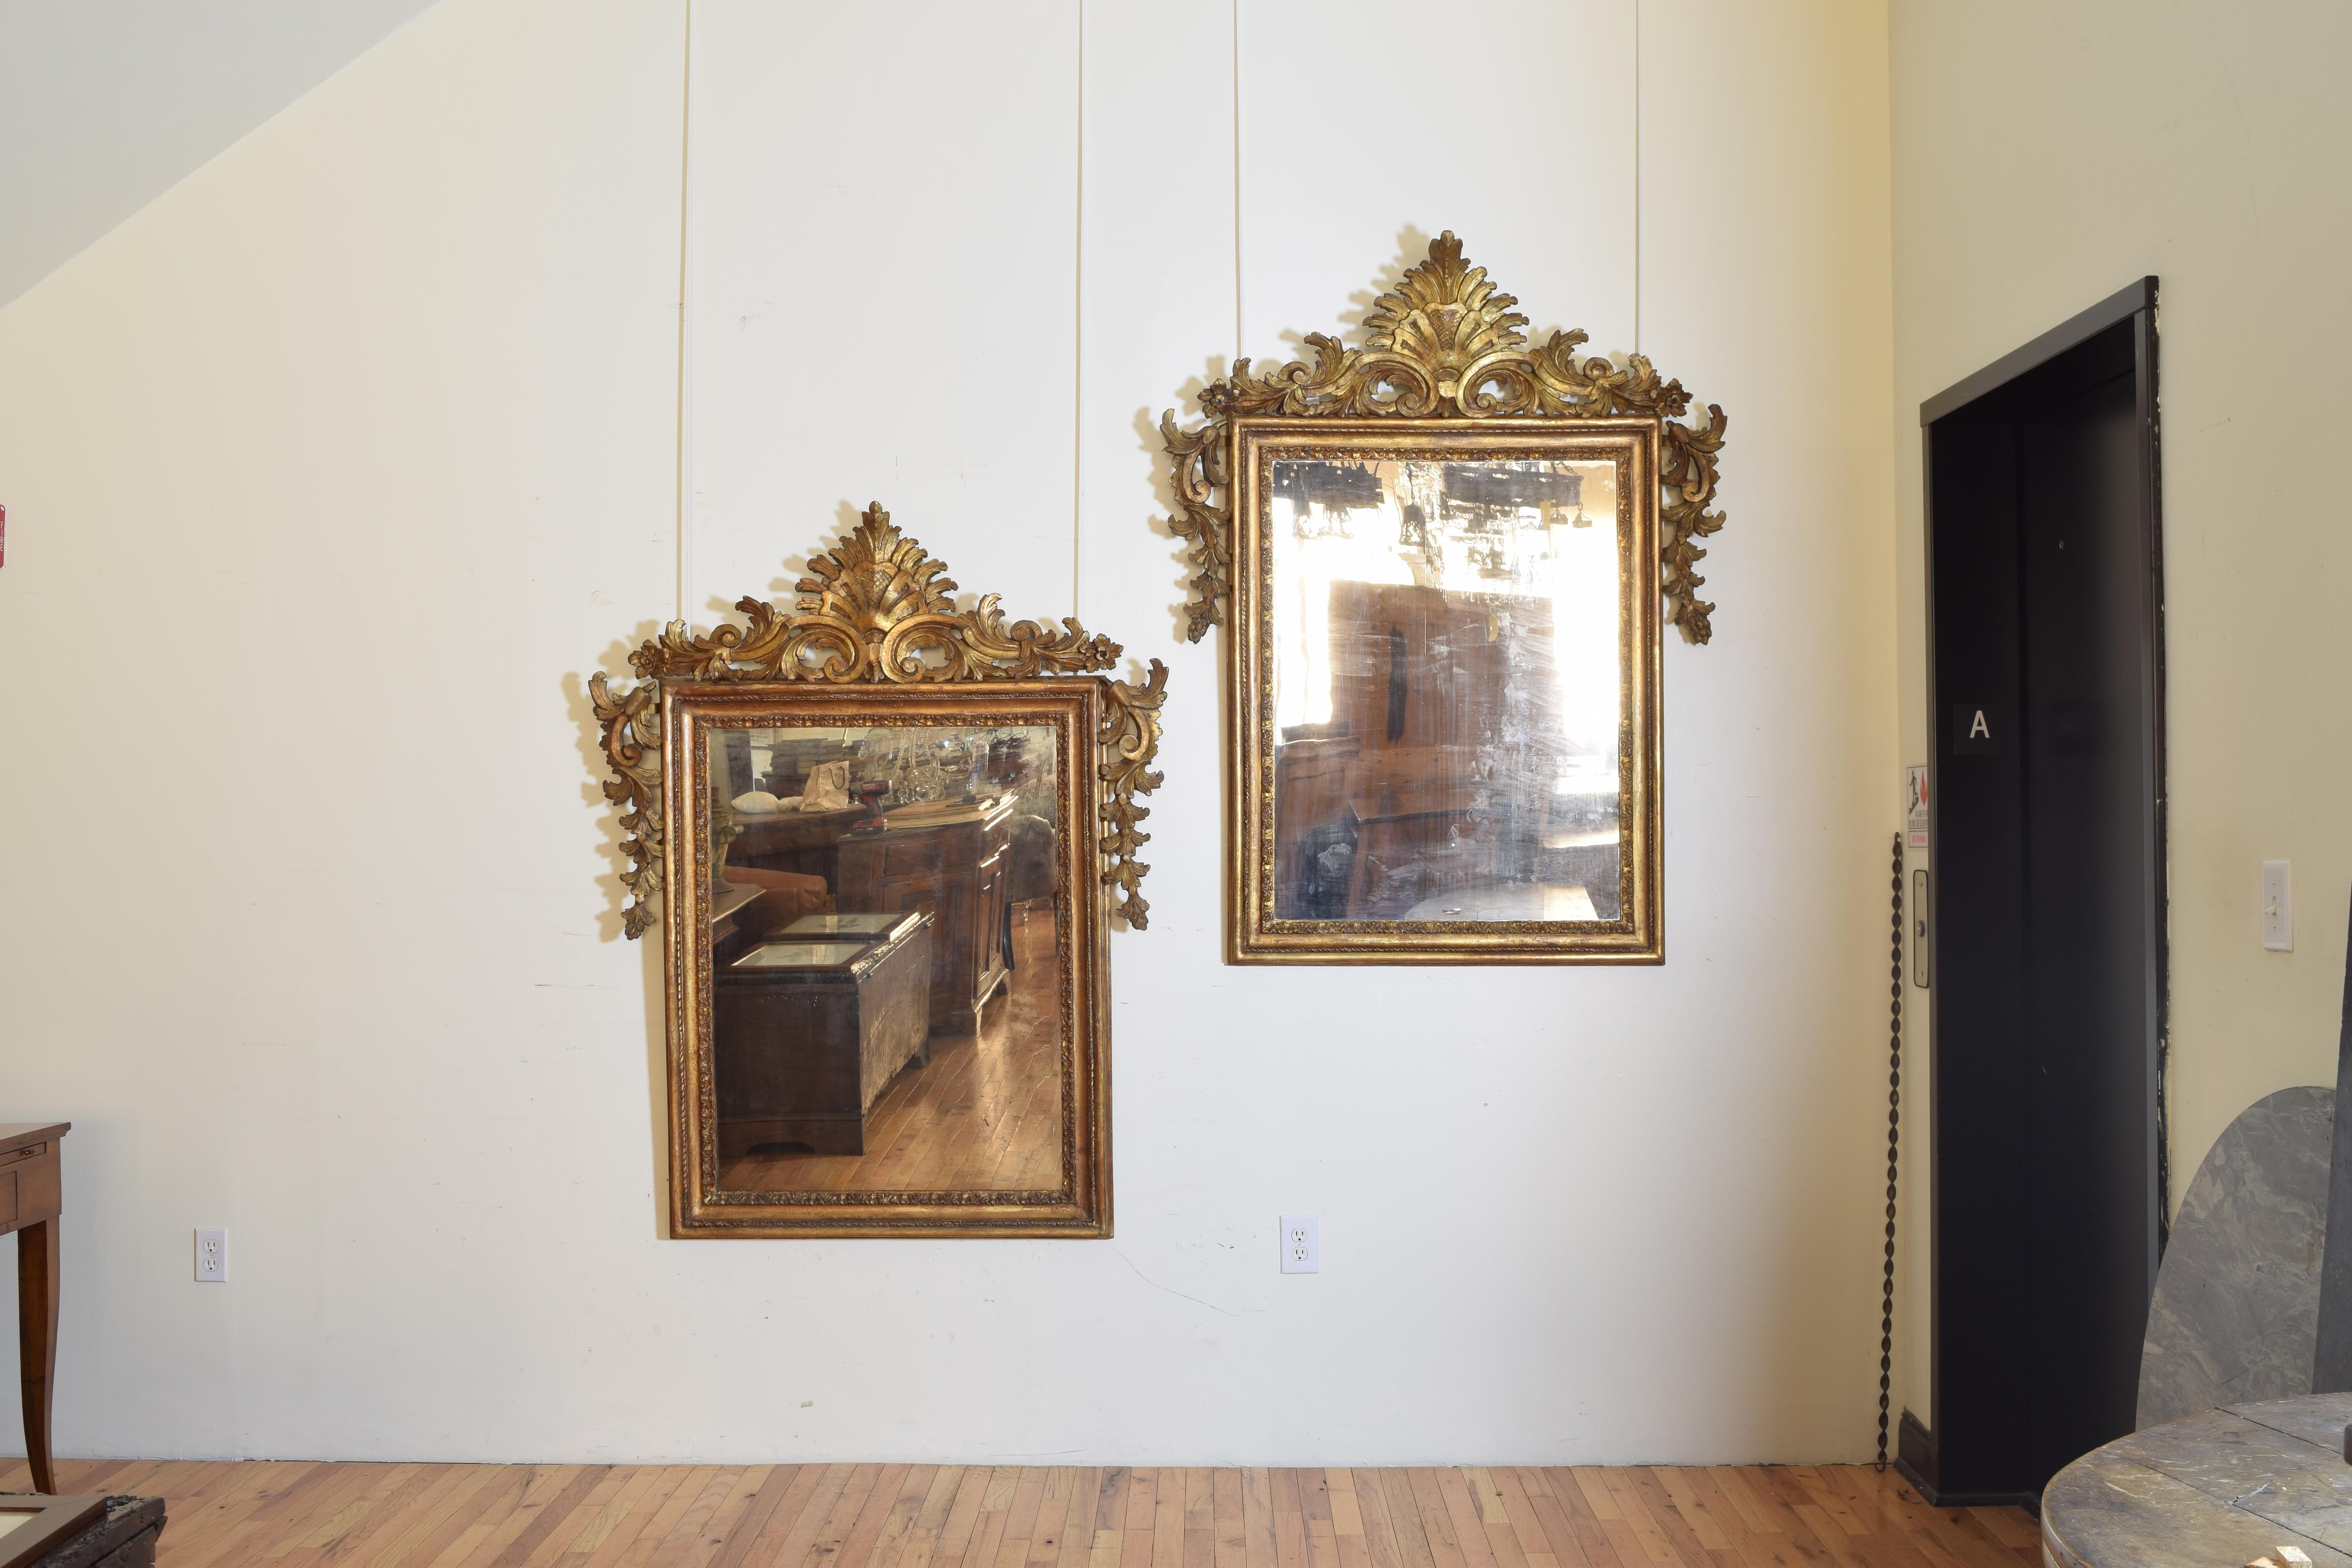 These exceptional and rare mirrors are silver gilt with ambered lacquer and retain their antique mirror plates, the interiors of each mirror a rectangular frame with raised mouldings consisting of carved leaf forms and carved braided ropes, attached